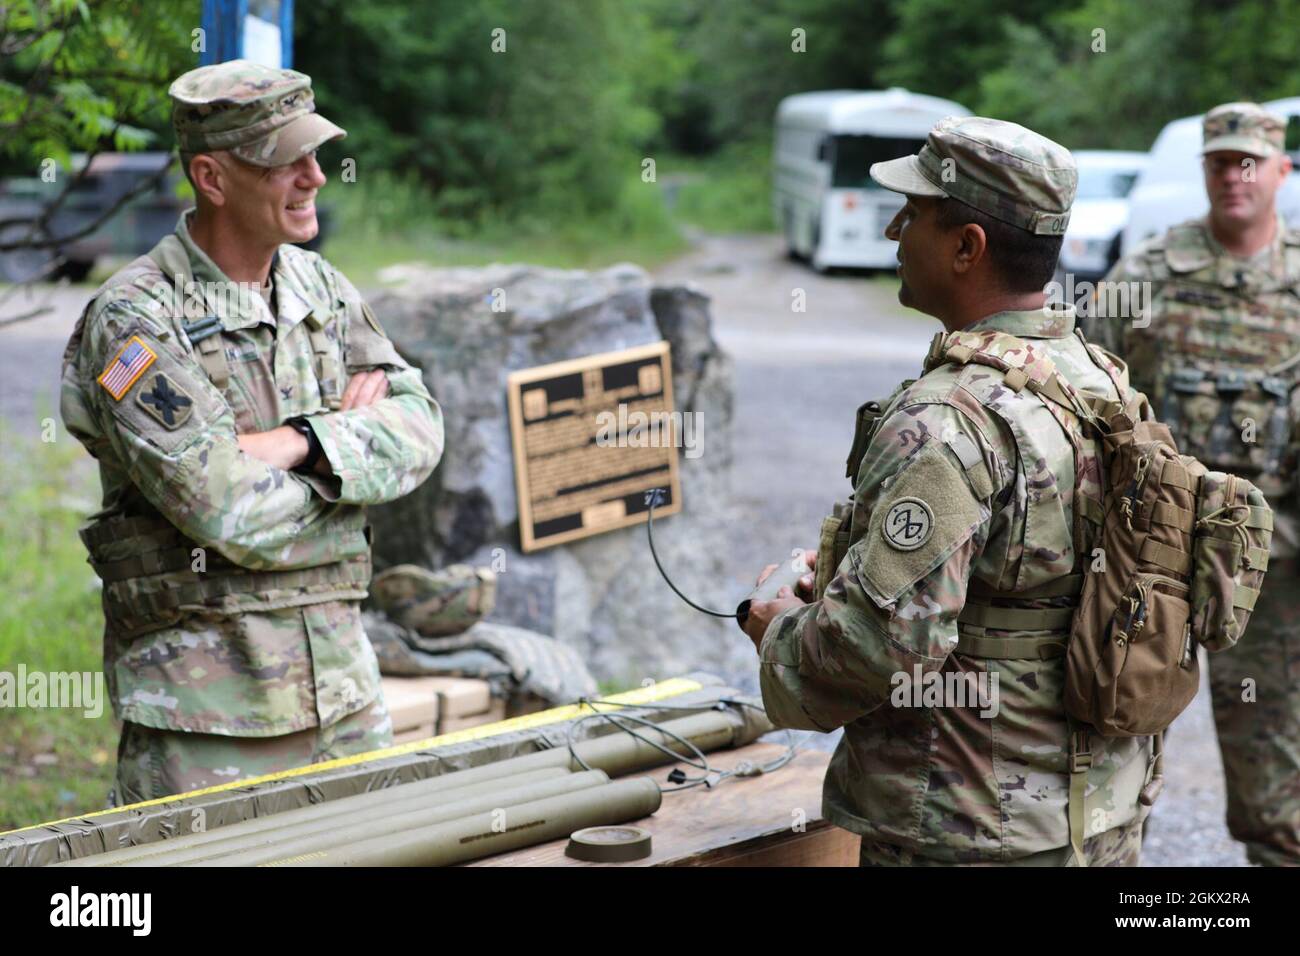 Col. Sean Flynn, commander of the 27th Infantry Brigade Combat Team, speaks with Staff Sgt. Manuel Olivo, a combat engineer assigned to the New York Army National Guard's Bravo Company, 152nd Brigade Engineer Battalion, while he assembles an improvised claymore mine at Fort Drum, New York on July 14, 2021.As part of the company's annual training, combat and horizontal construction engineers practiced emplacing C4 explosives, shaping and cratering charges, bangalore torpedoes, and explosively formed projectiles, as well as using improvisation techniques to broaden their capabilities. Stock Photo